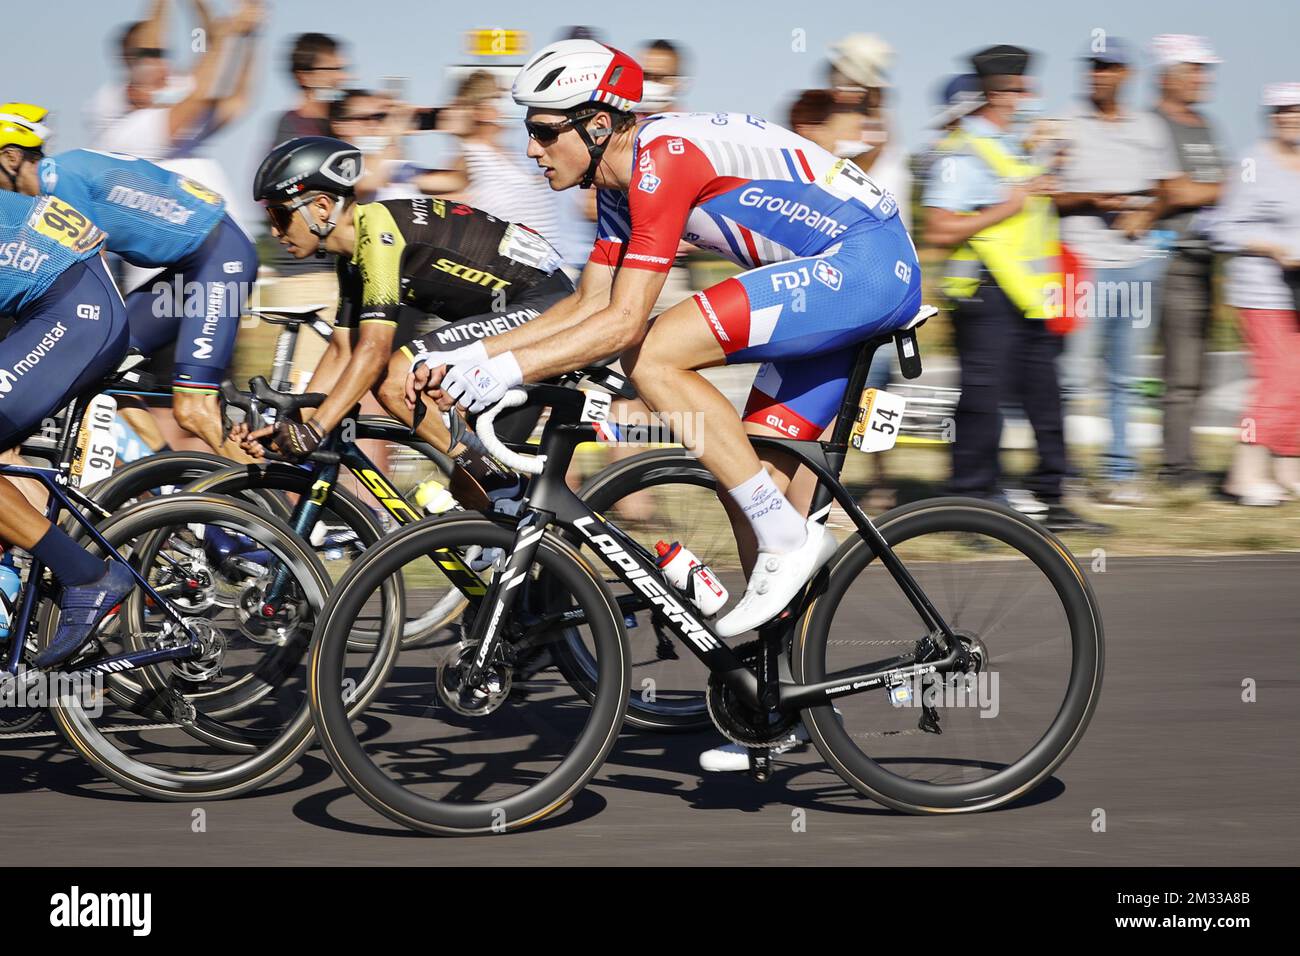 Stefan Kung of Groupama - Fdj pictured in action during the ninth stage of the 107th edition of the Tour de France cycling race from Ile d'Oleron Le Chateau-d'Oleron to Ile de Re Saint-Martin-de-Re (168,5km), in France, Tuesday 08 September 2020. This year's Tour de France was postponed due to the worldwide Covid-19 pandemic. The 2020 race starts in Nice on Saturday 29 August and ends on 20 September. BELGA PHOTO DAVID STOCKMAN Stock Photo